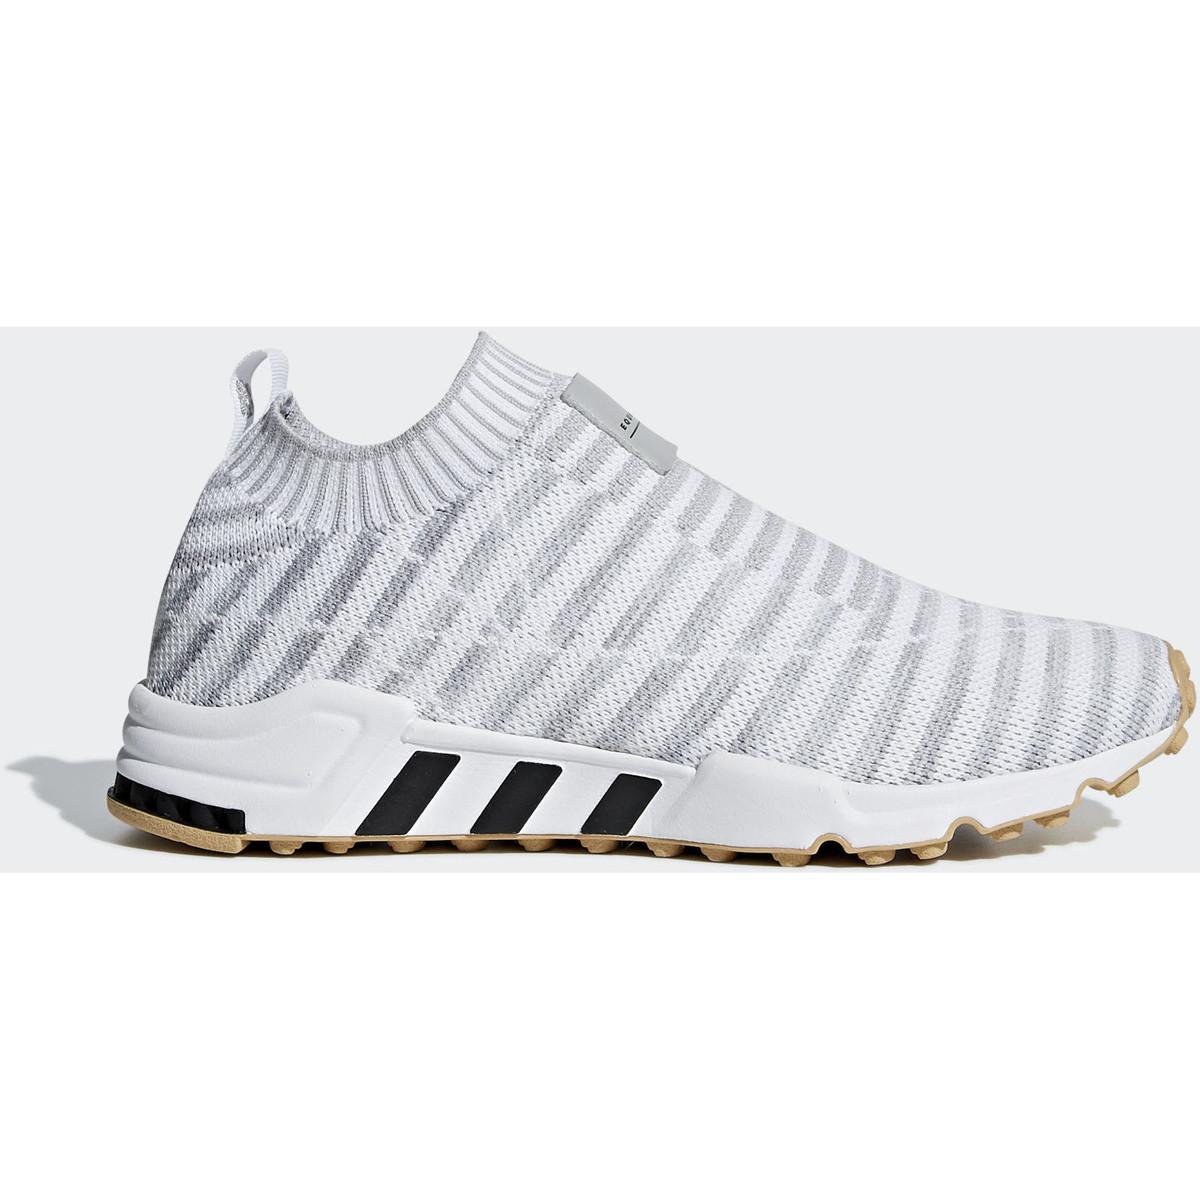 adidas eqt support sock homme rose